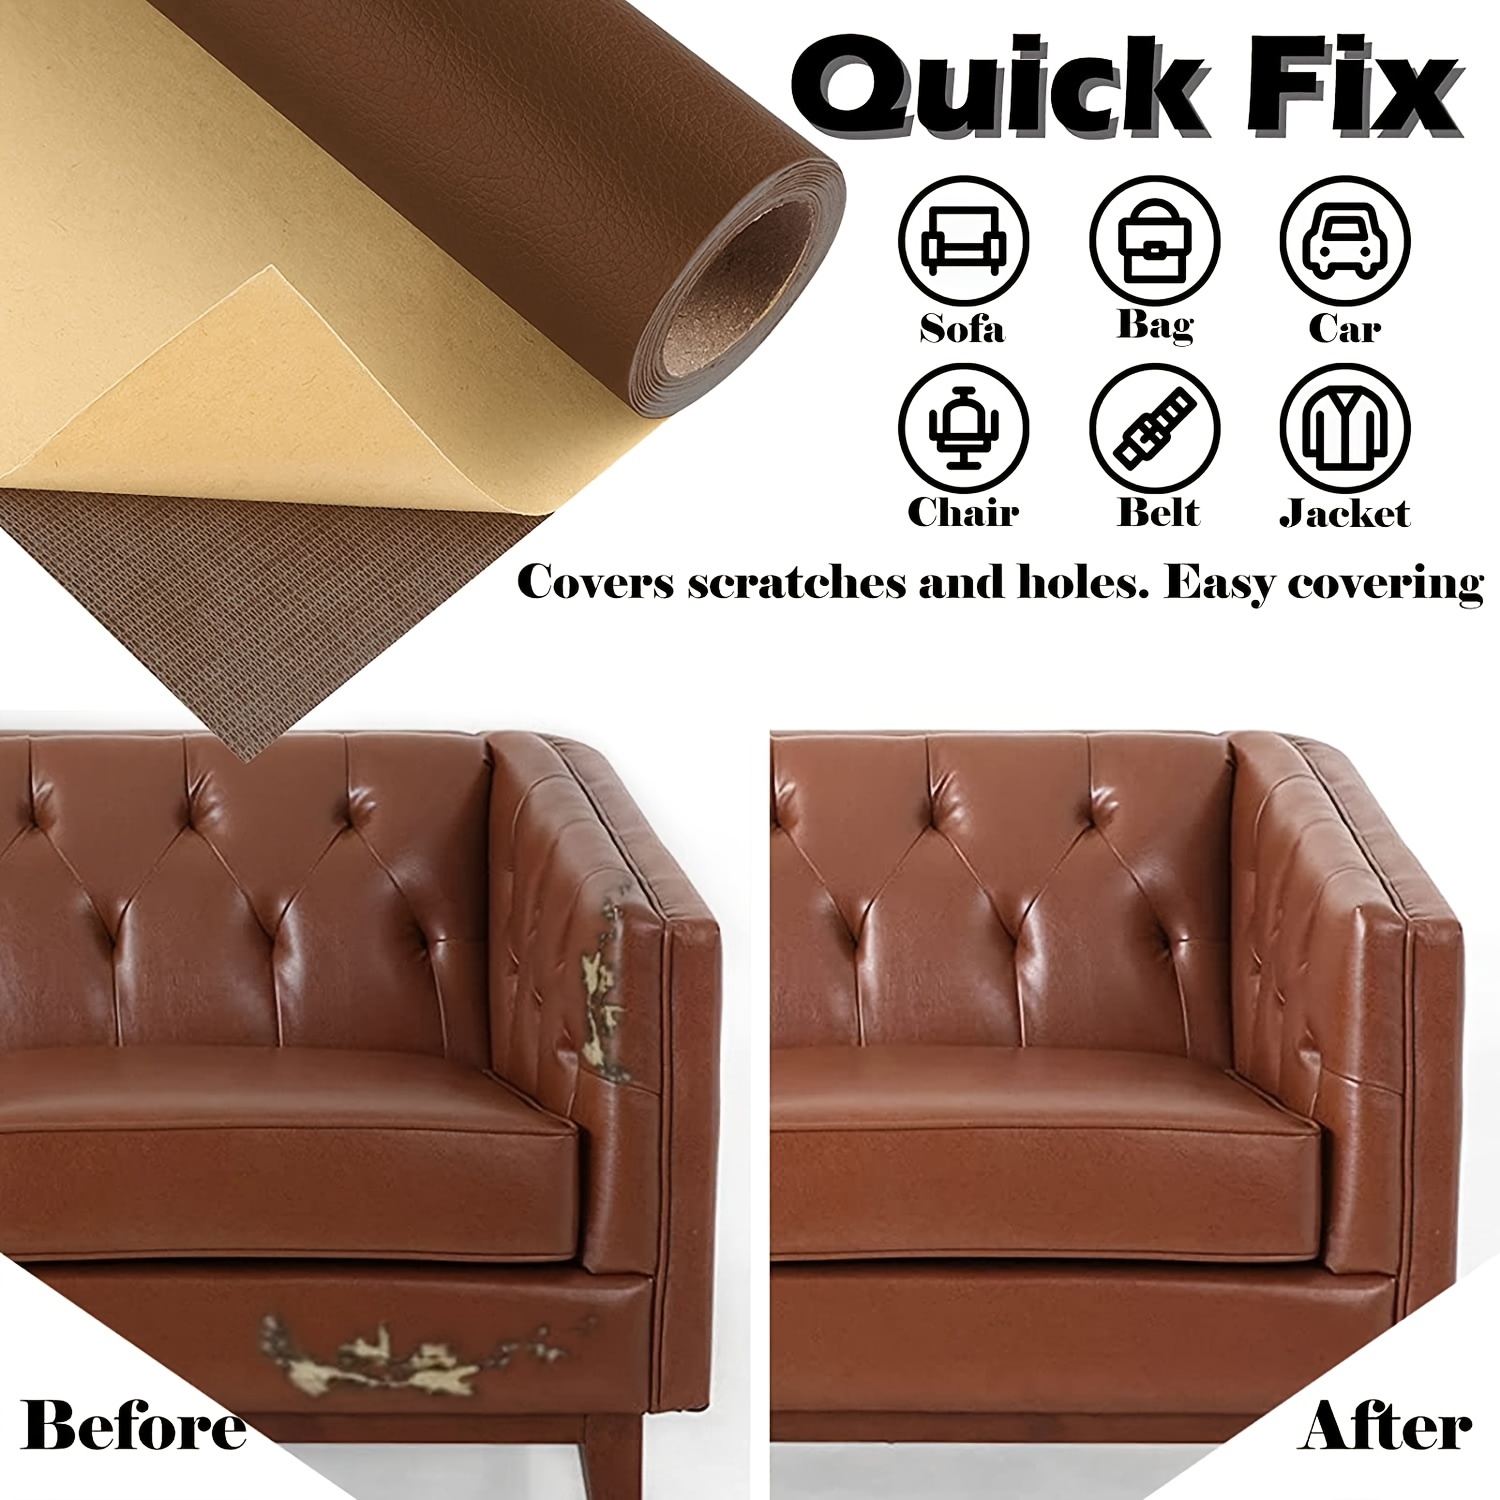 Leather couch patch,Leather Repair Patch for Couches Large Self